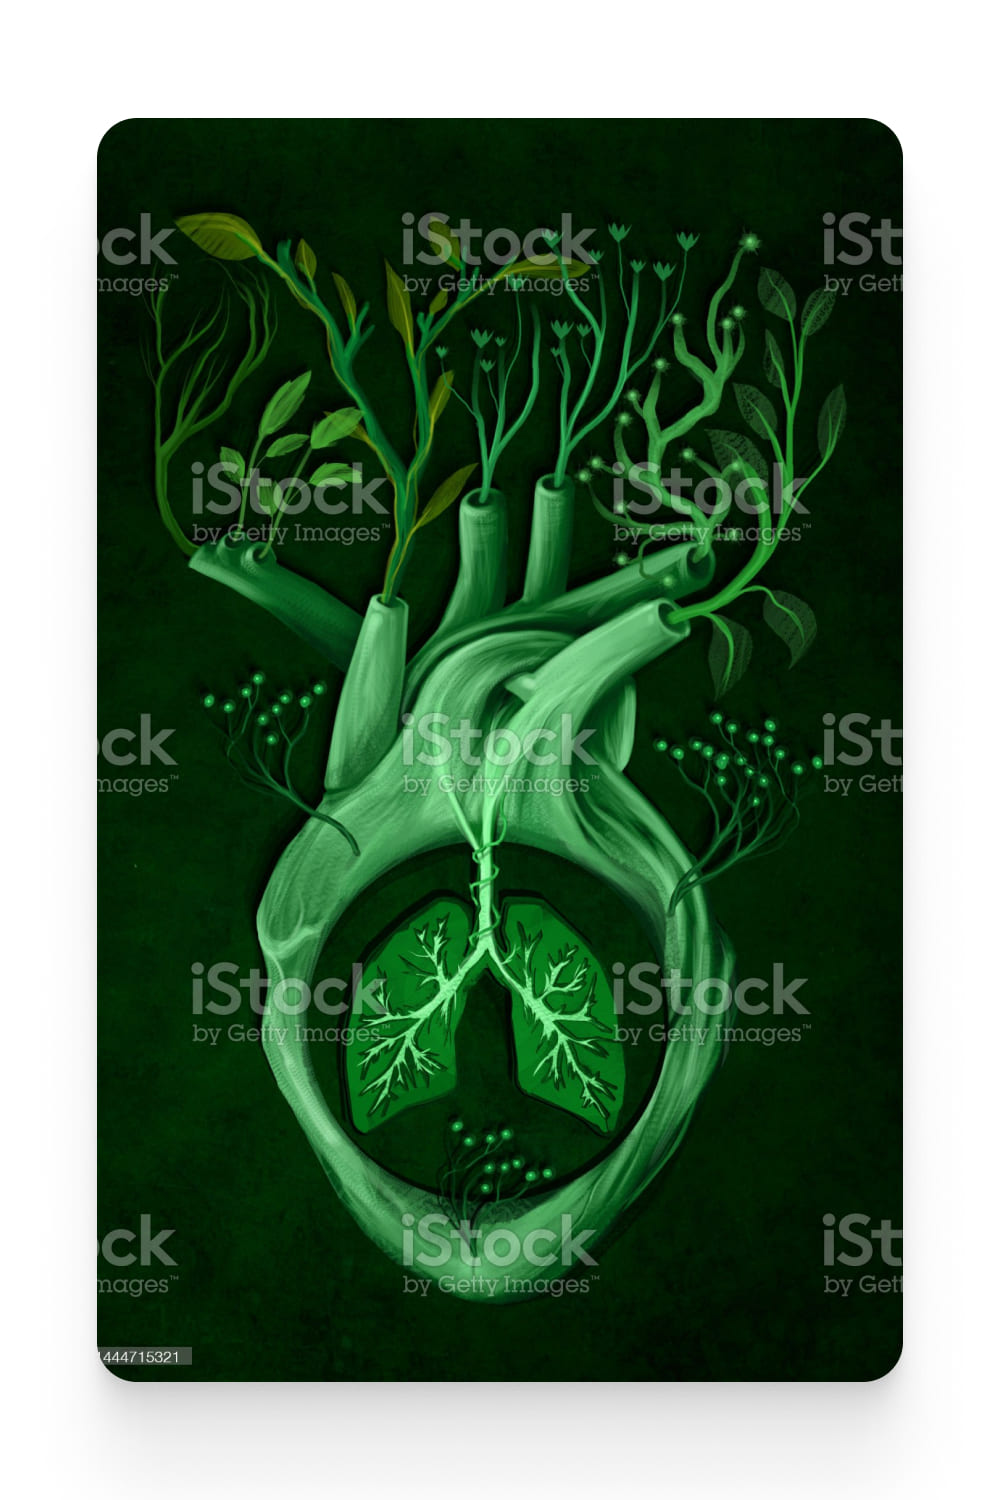 Green heart gives more life to the green lungs of planet Earth.